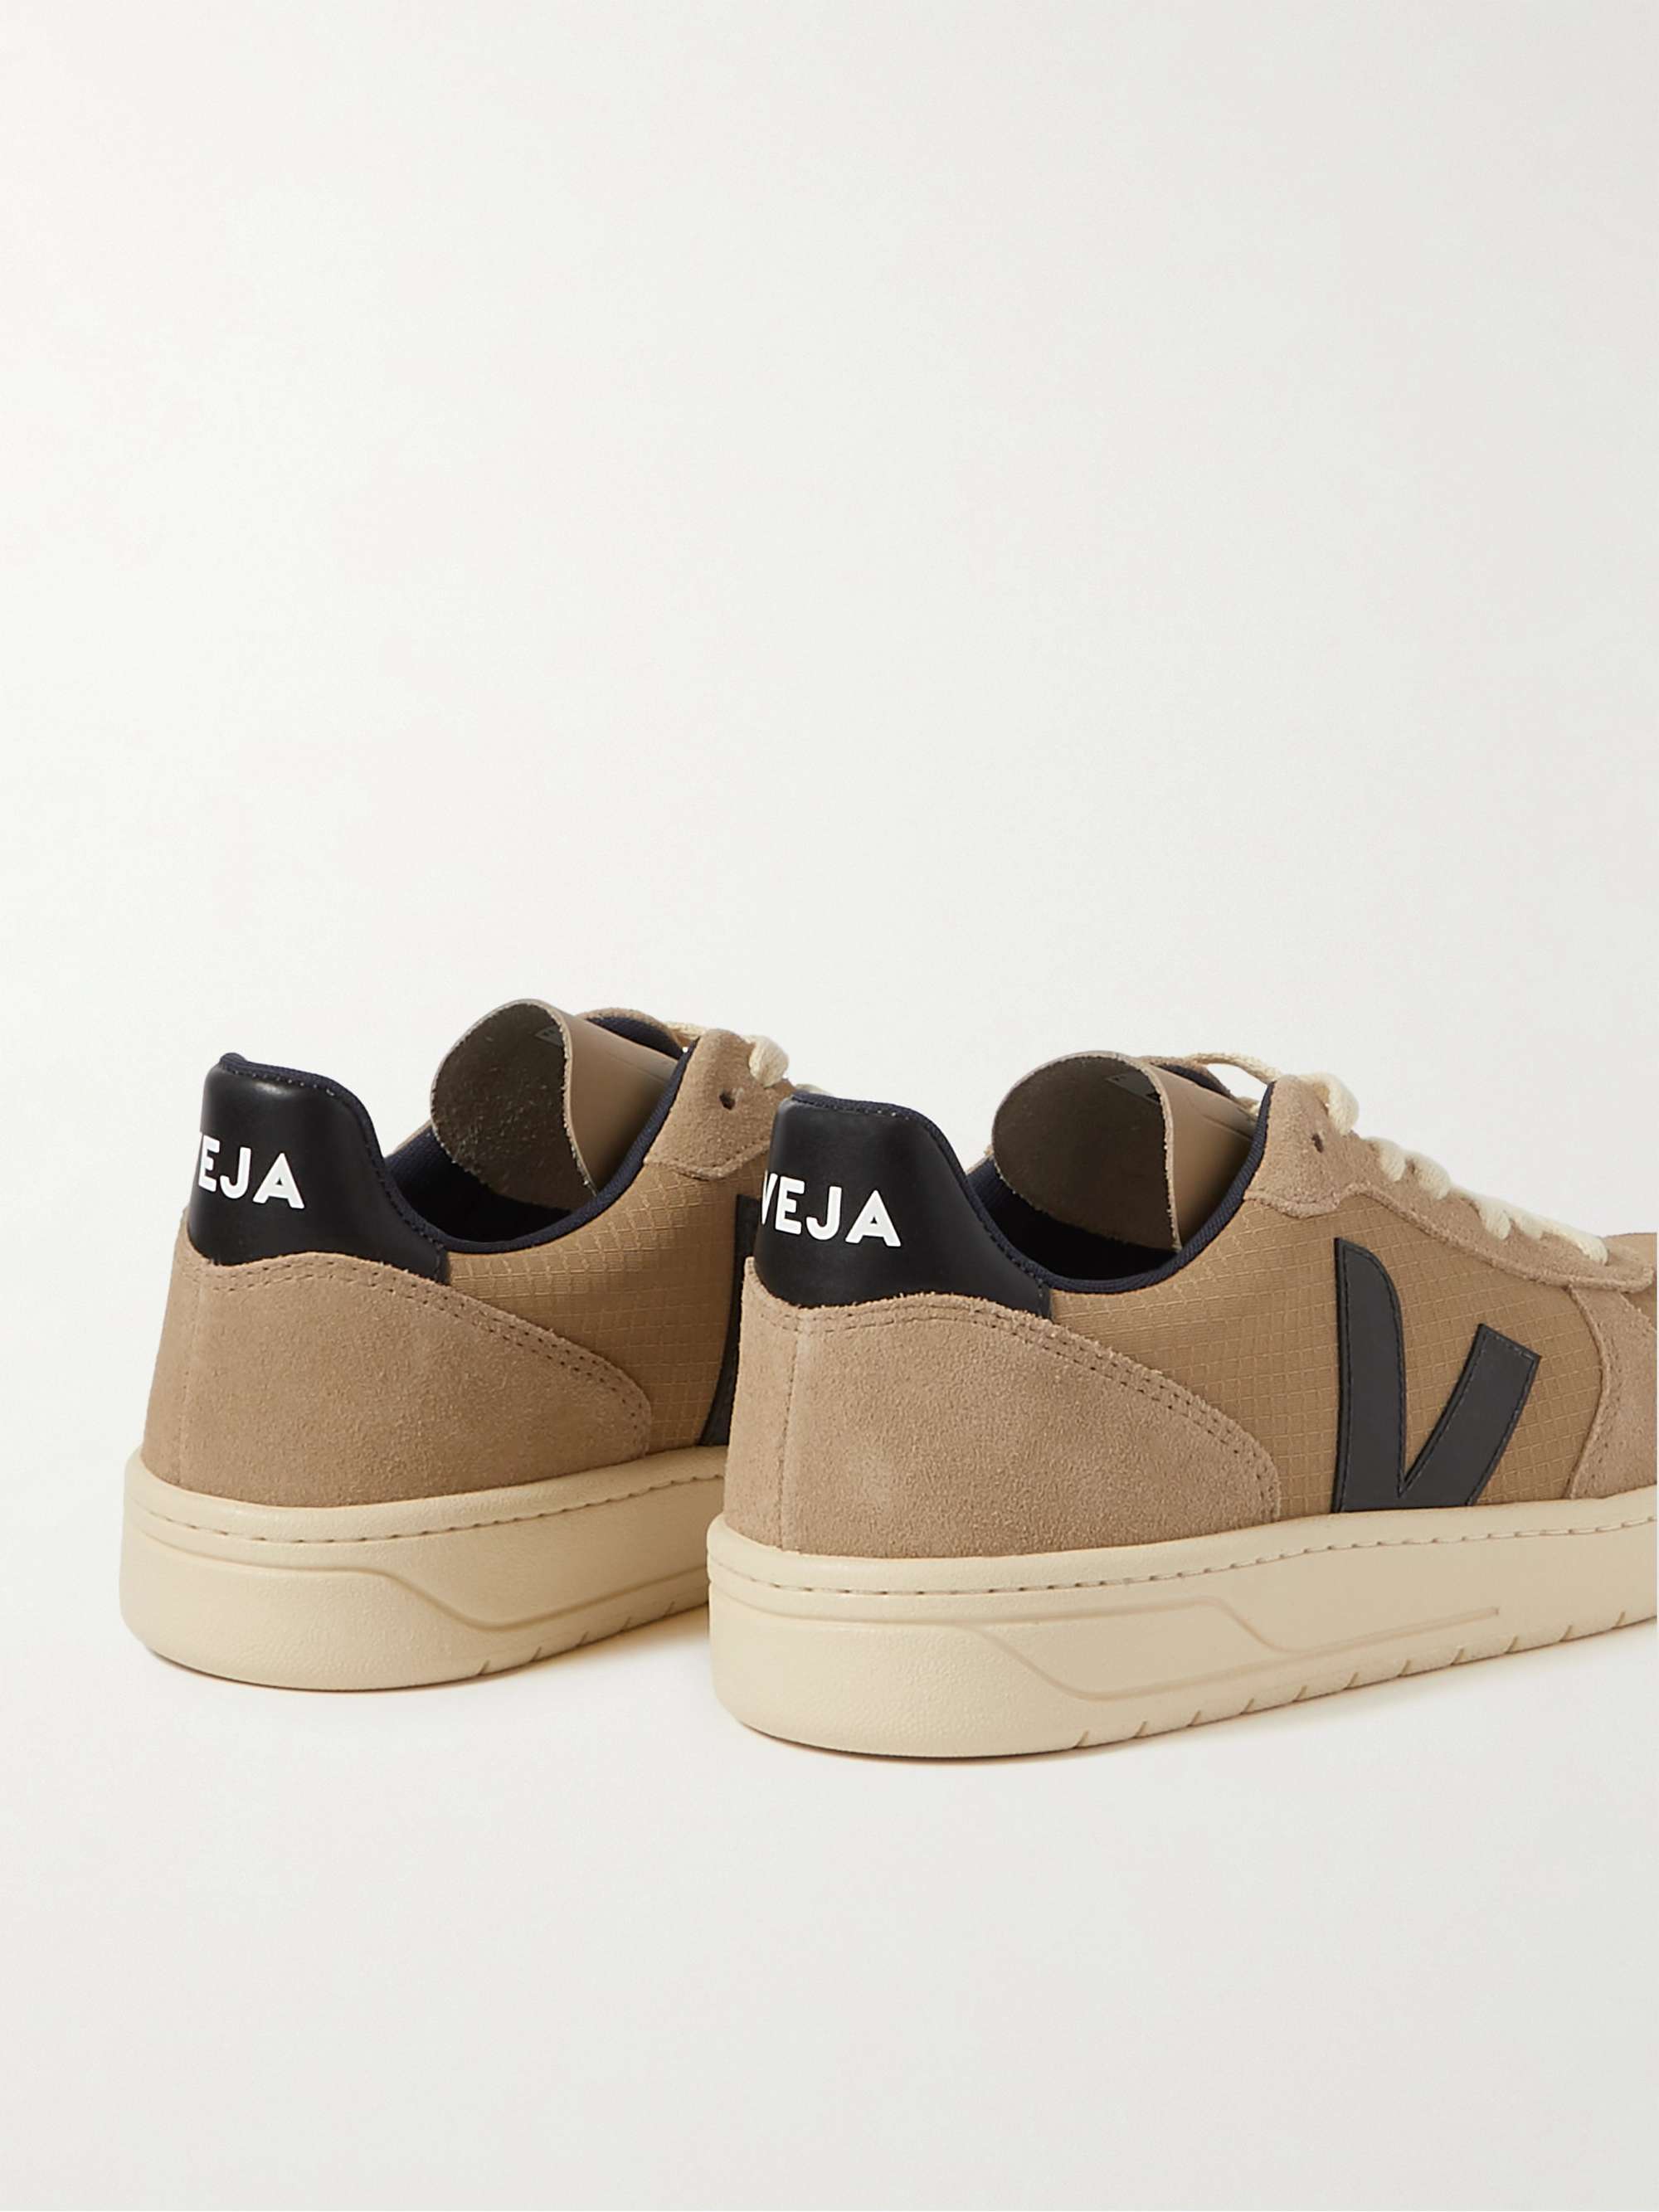 VEJA V-10 Suede, Leather and Rubber-Trimmed Ripstop Sneakers | MR PORTER